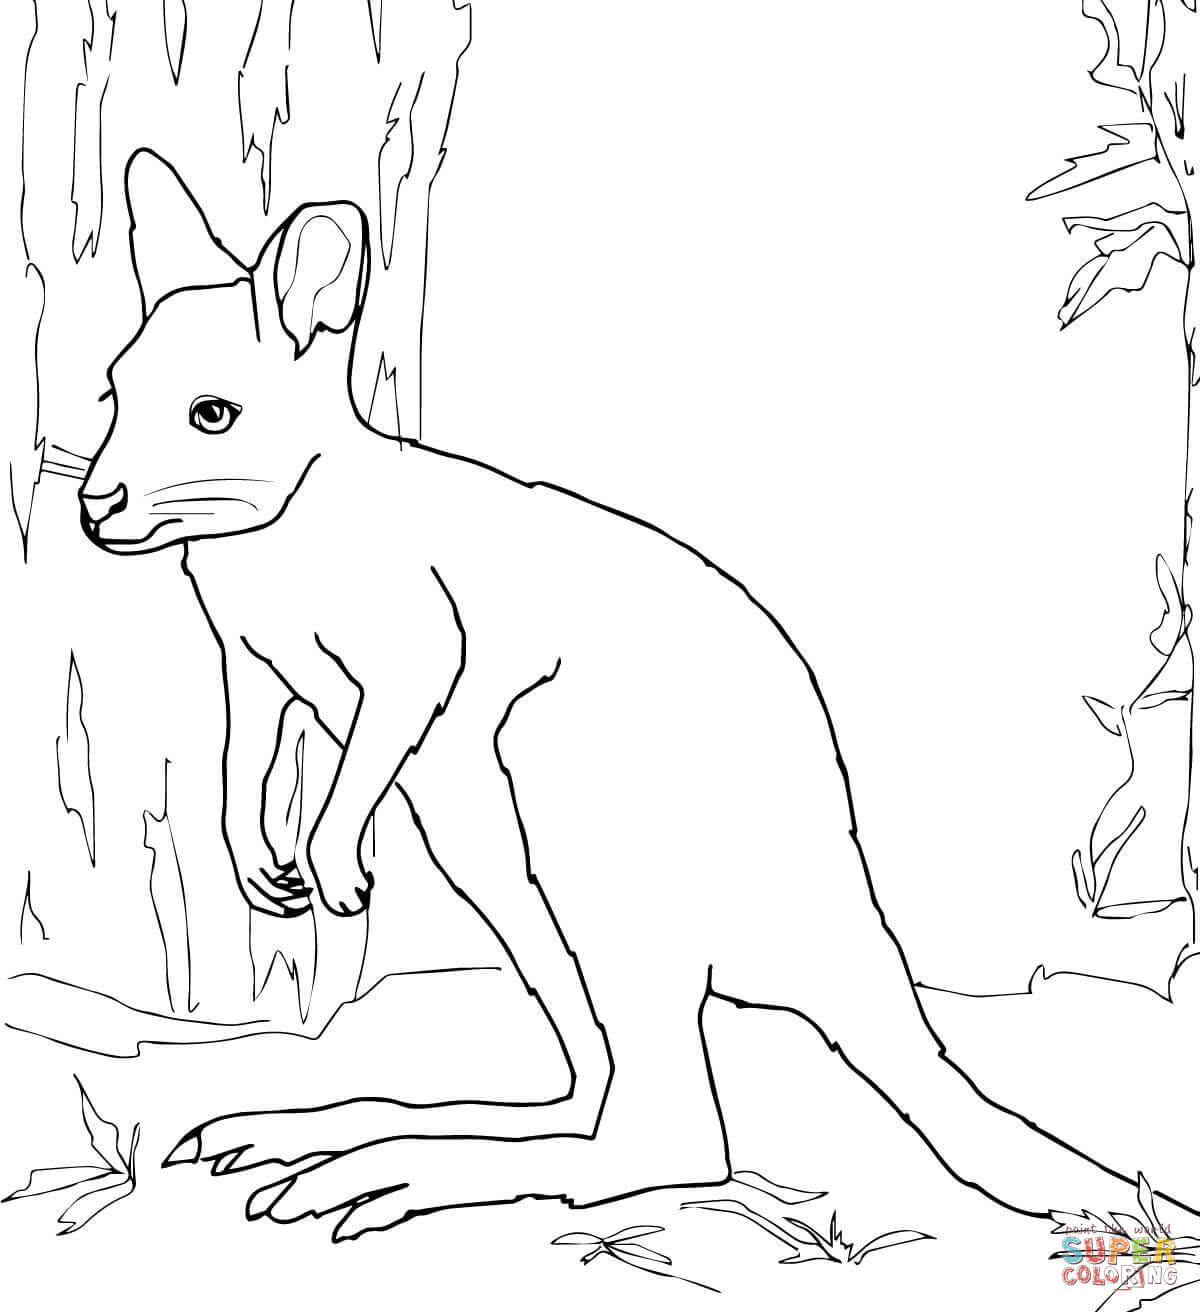 Red-necked Wallaby coloring #3, Download drawings